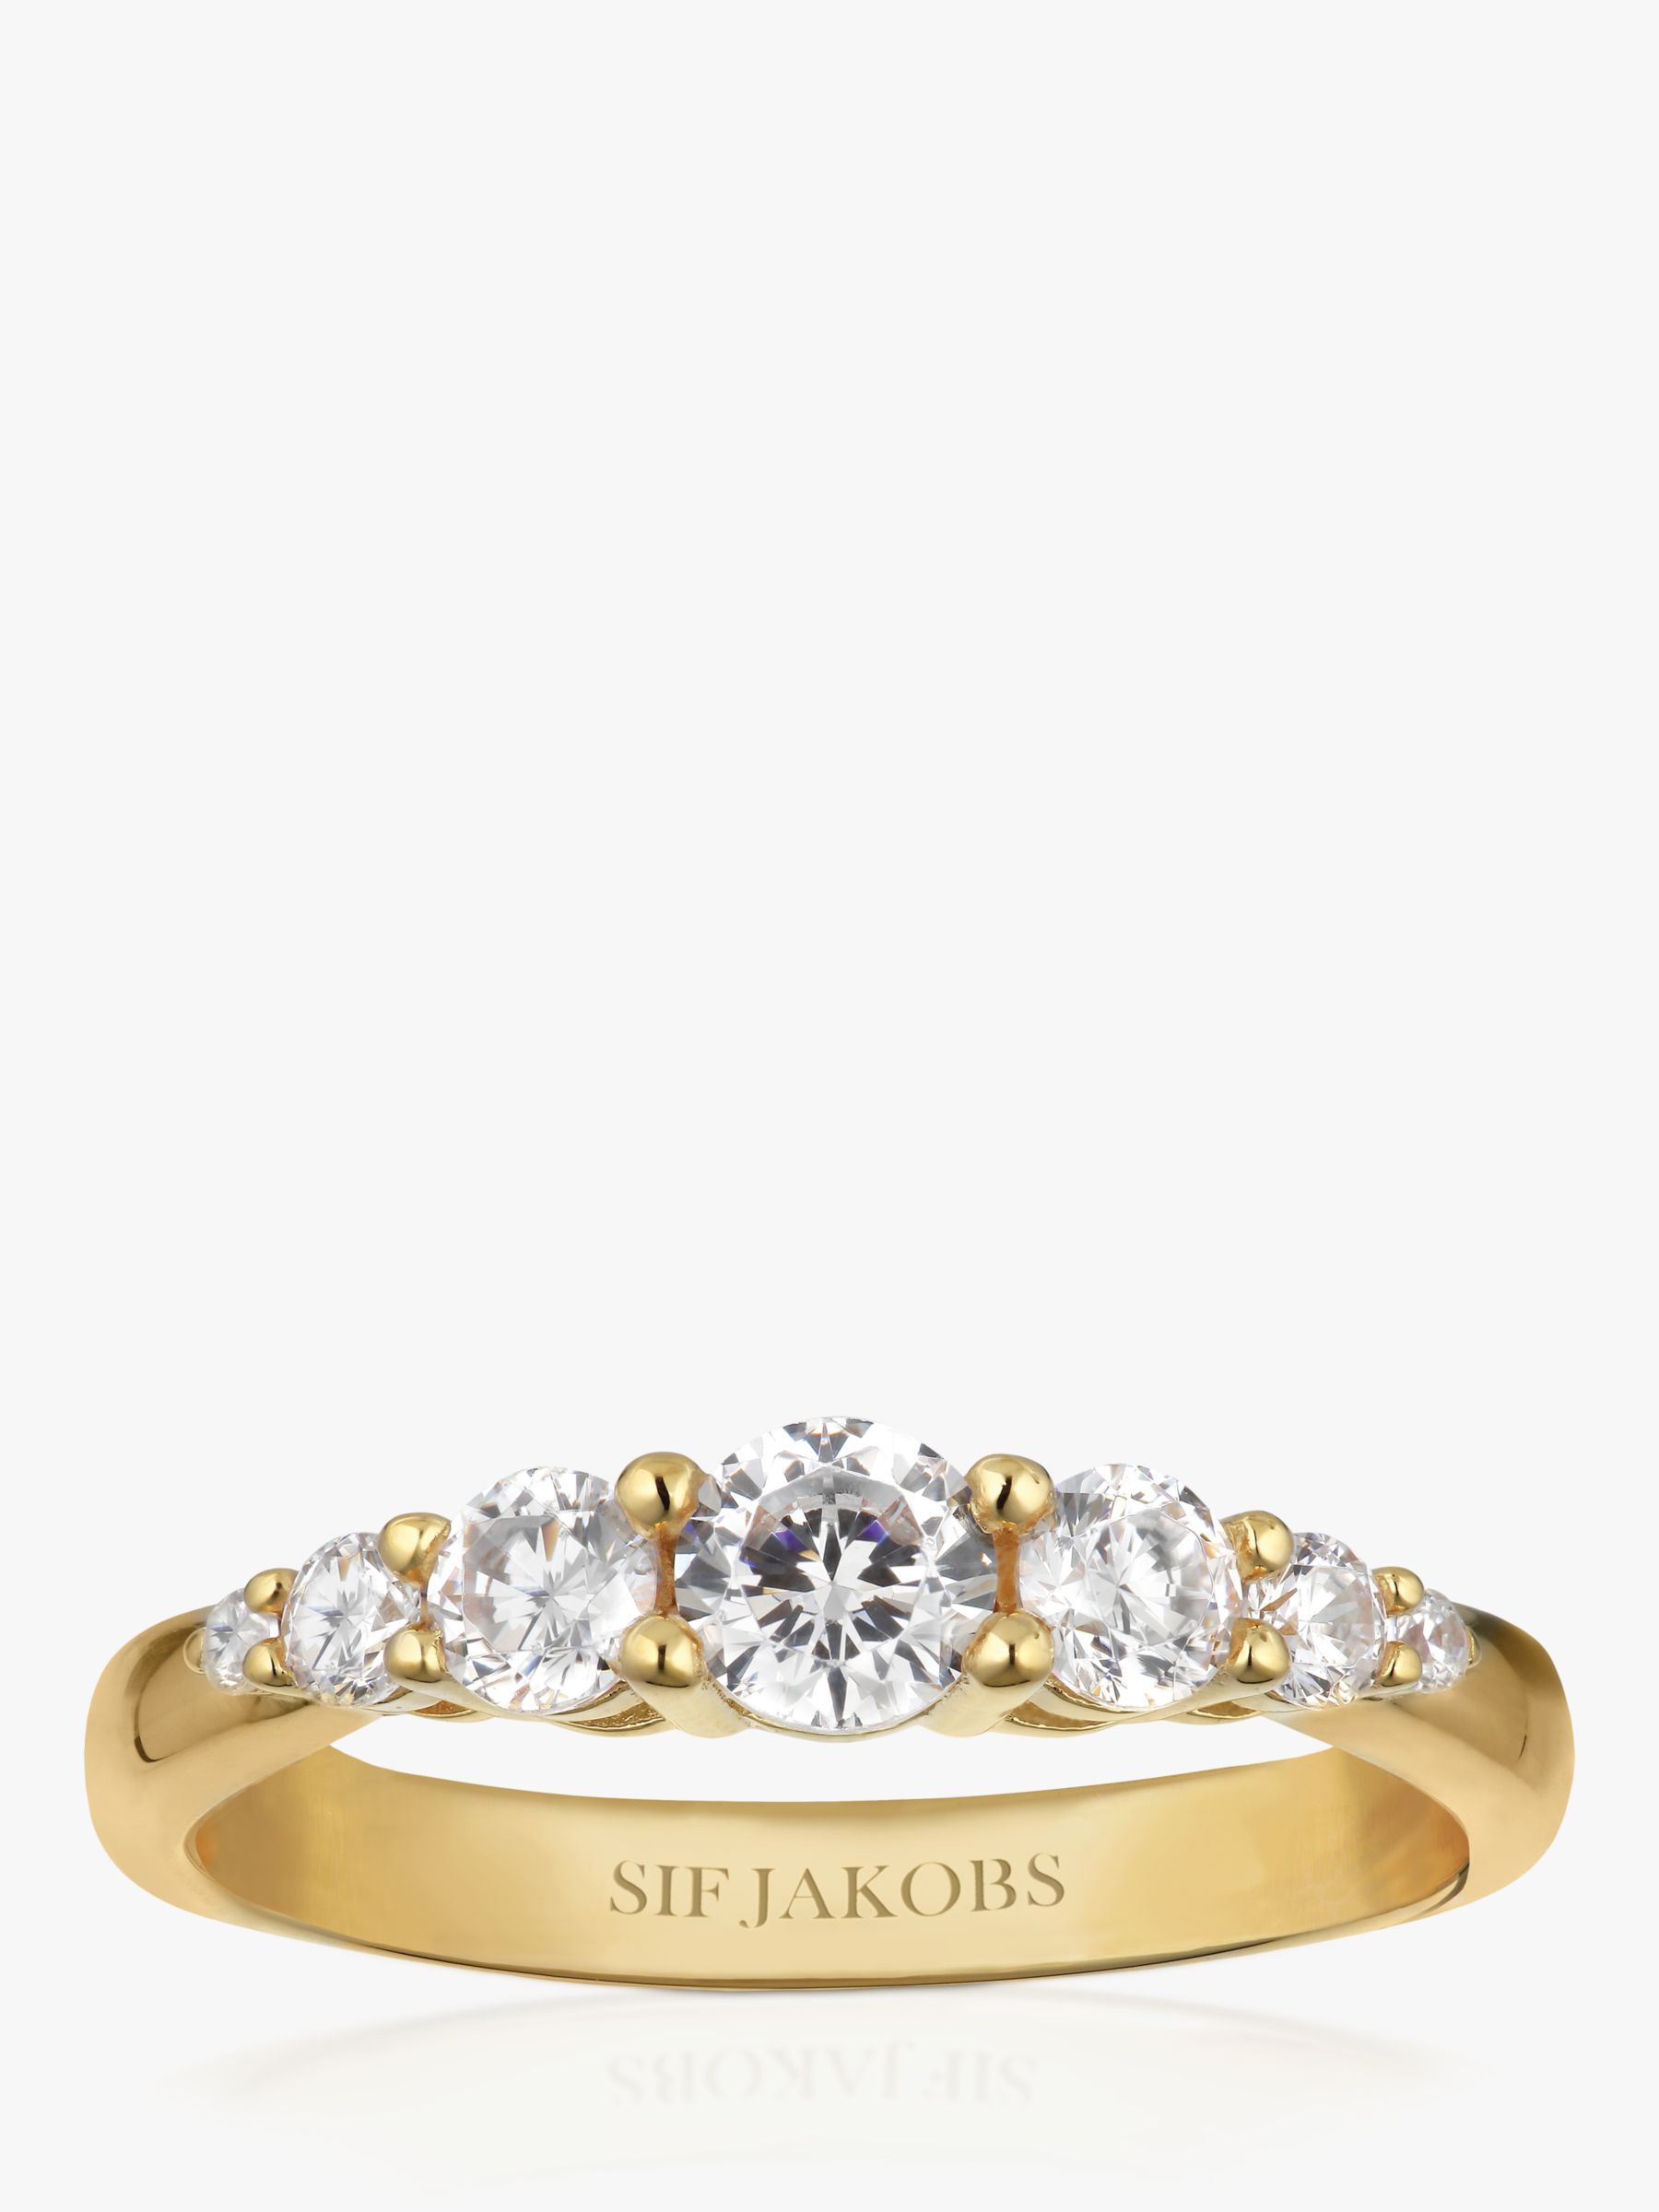 Sif Jakobs Jewellery Graduating Cubic Zirconia Ring, Gold/Clear, 54